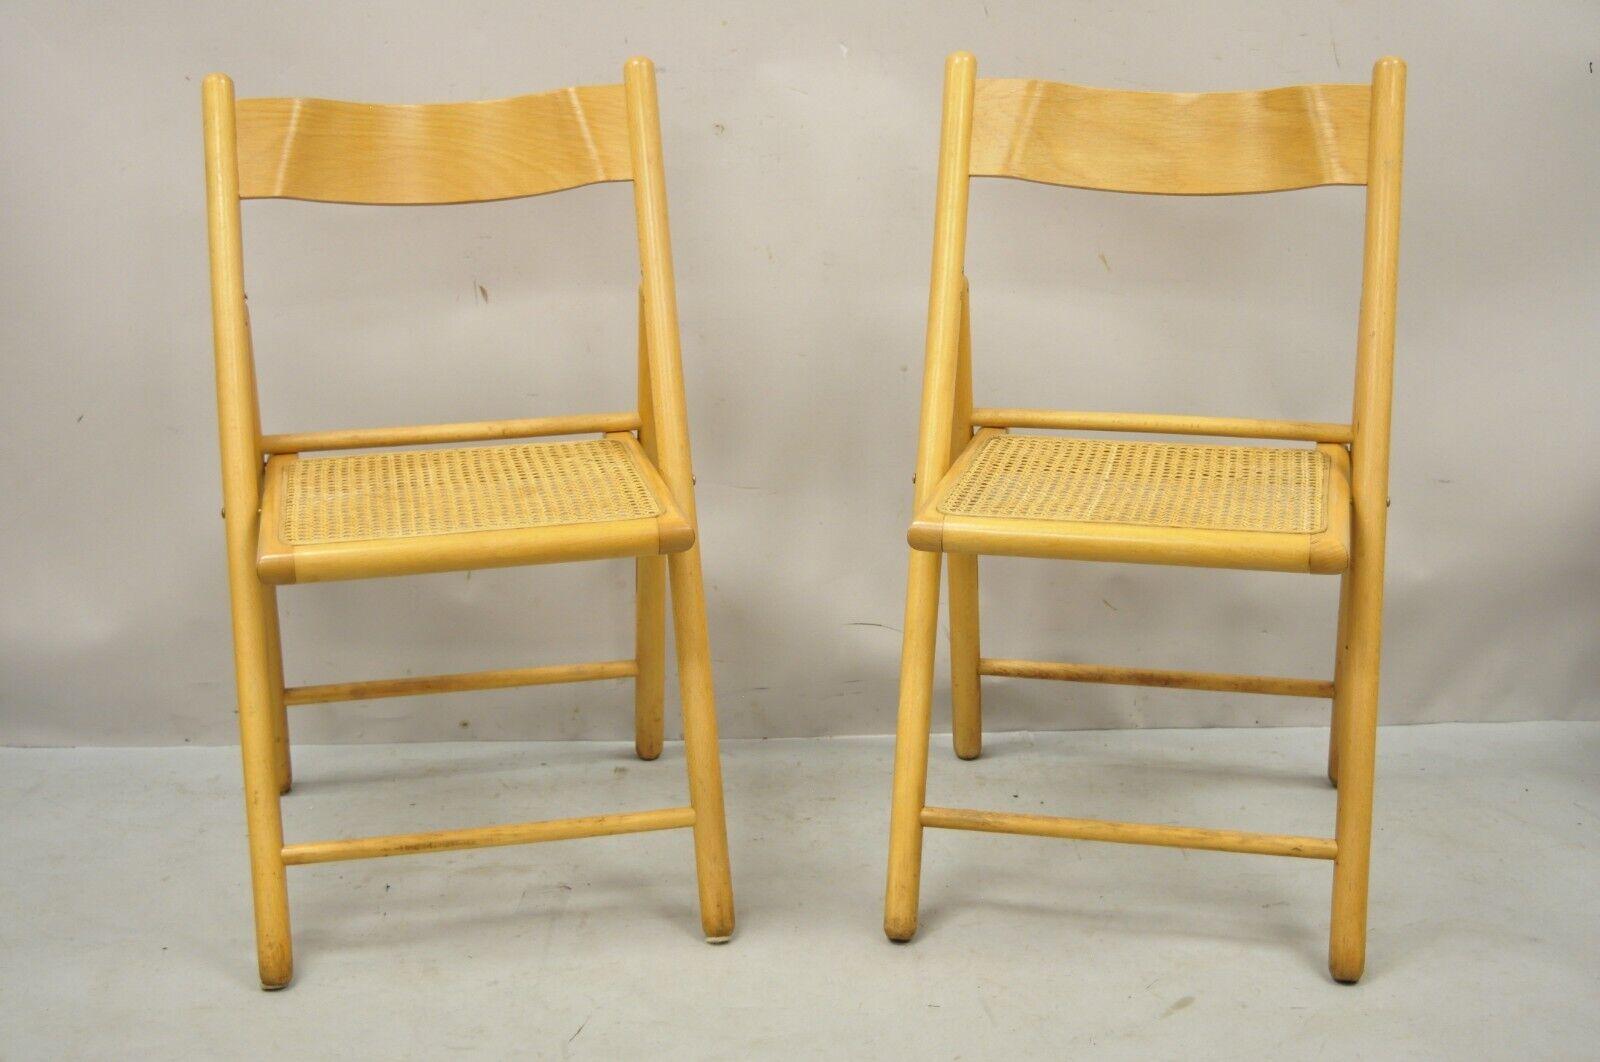 Vintage Habitat England Bentwood Cane Rattan Folding Chairs - a Pair For Sale 3